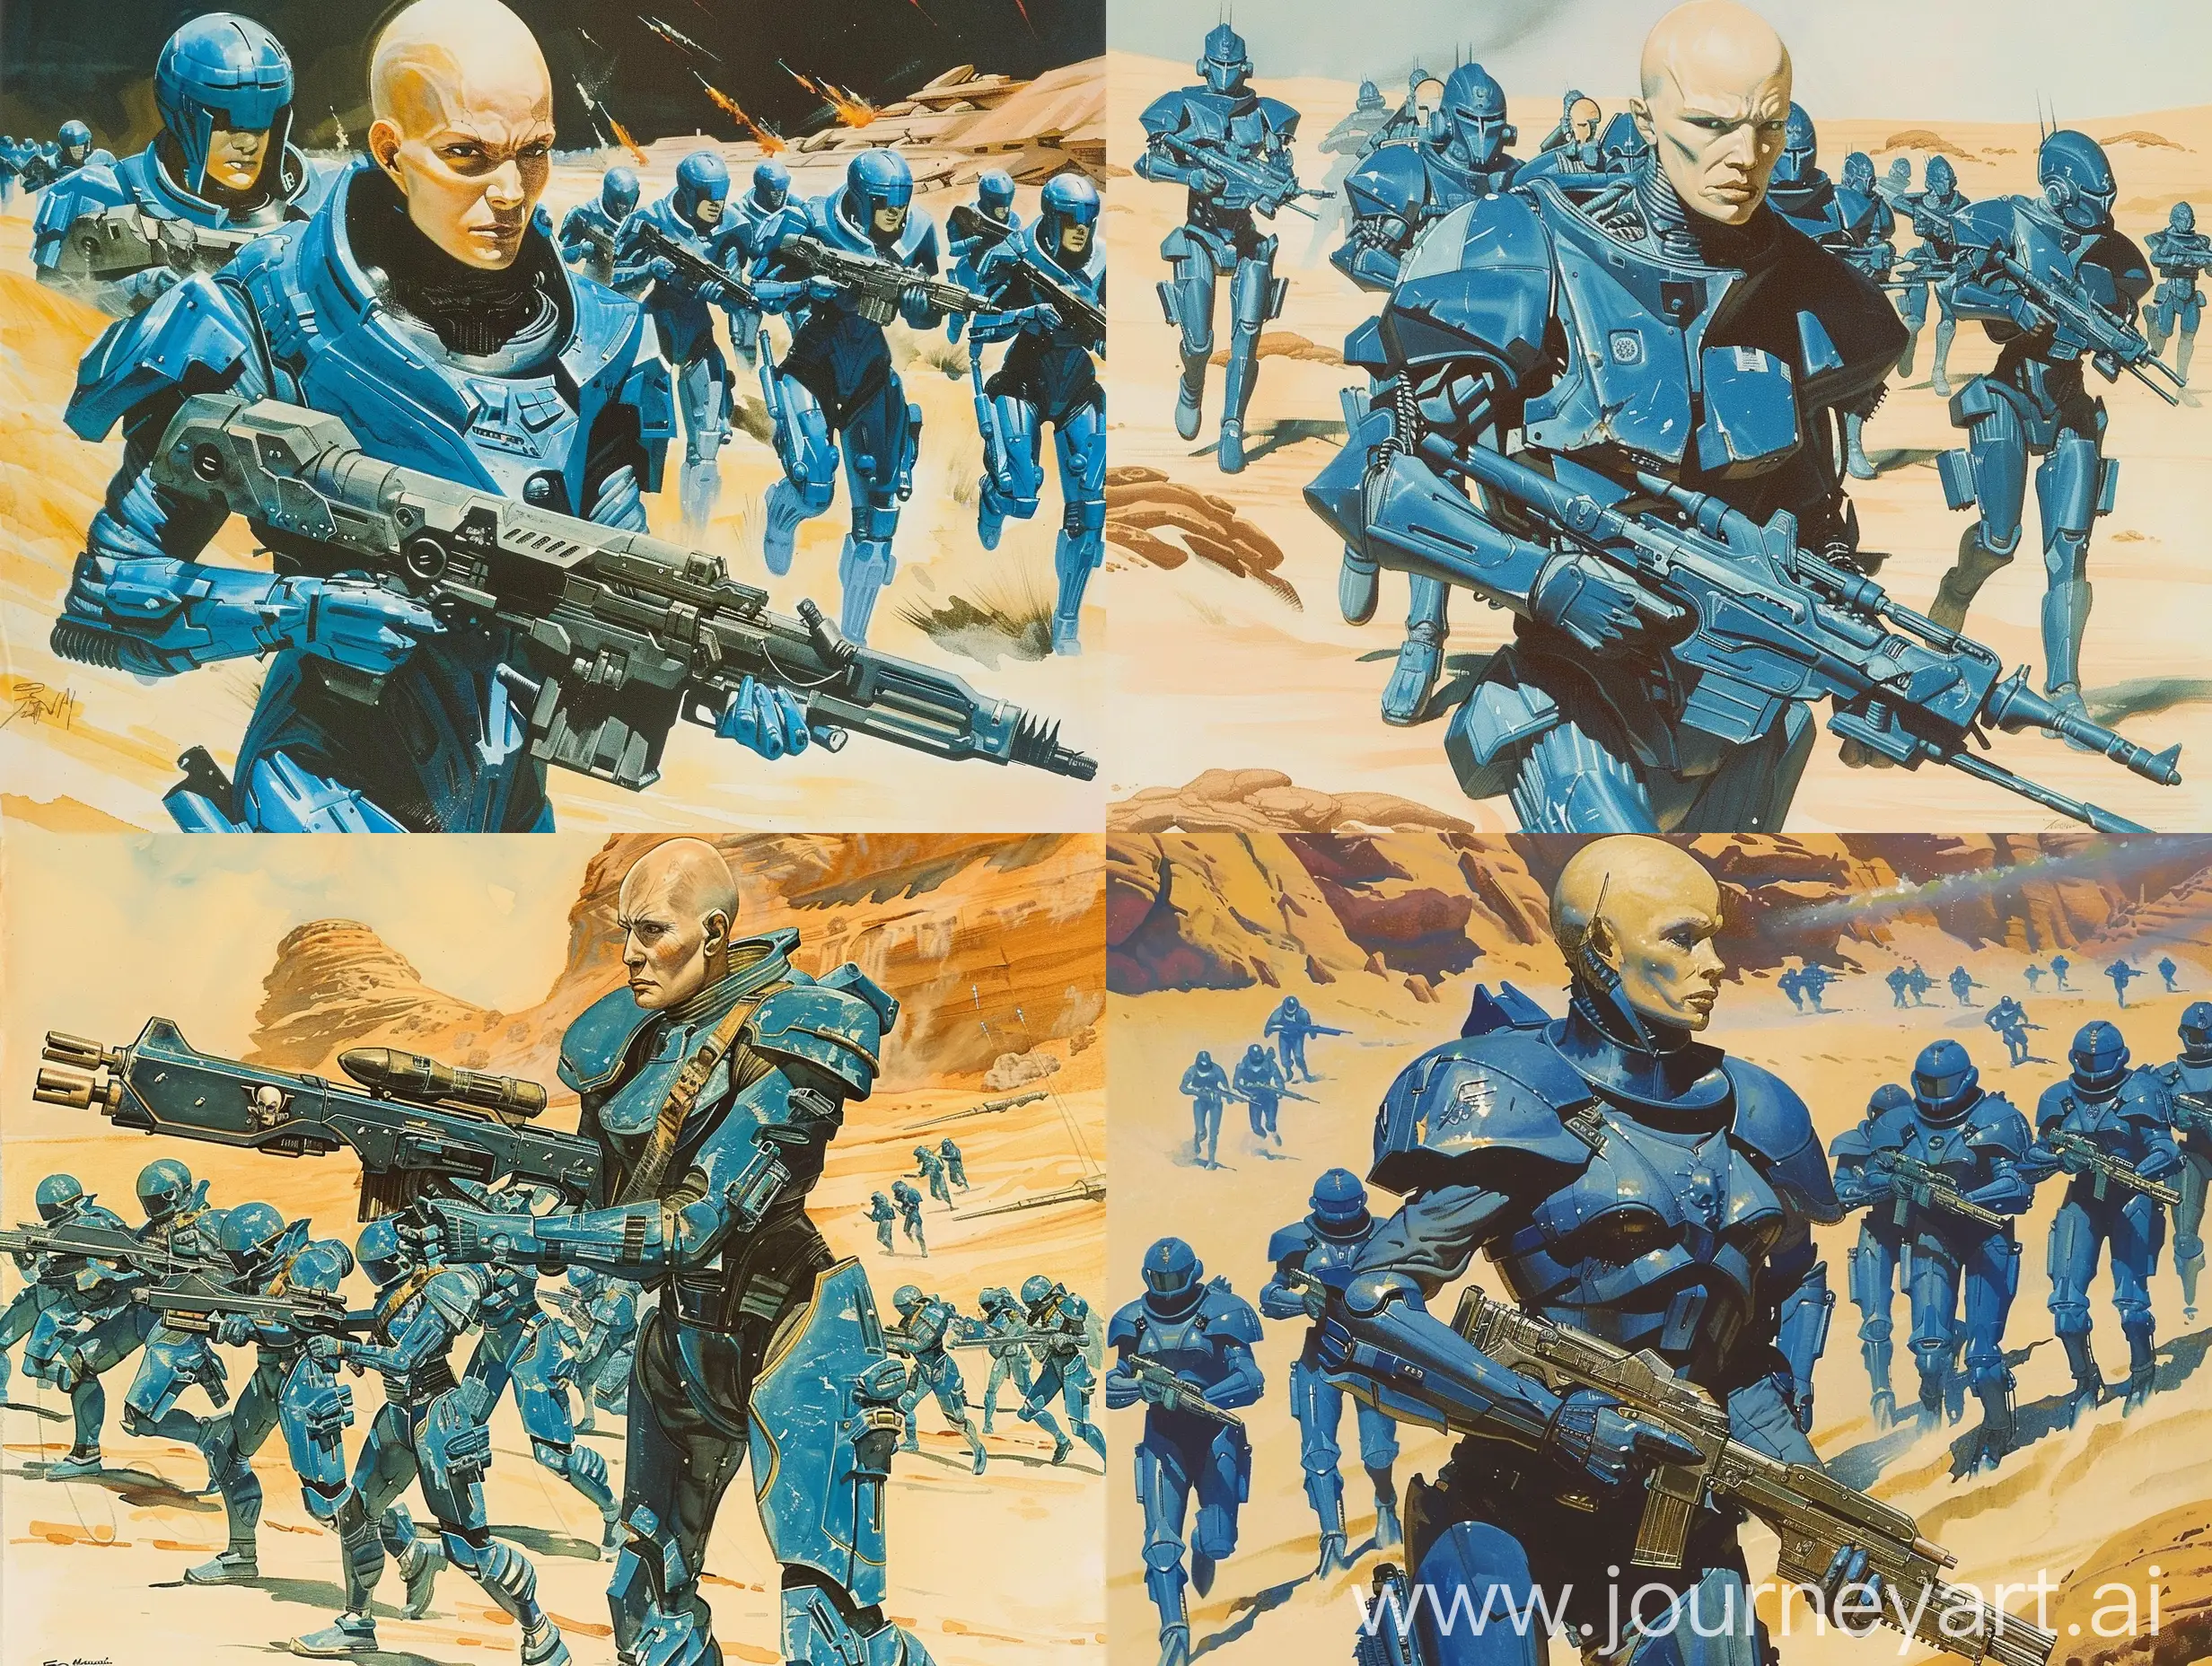 Old concept art of a tall pale bald woman(rectangular face shape) wearing a suit of blue plated space marine armor and holding a futuristic metal rifle leading a group of blue armored female troopers through a desert battlefield scene painted by Ralph McQuarrie. retro science fiction art style

